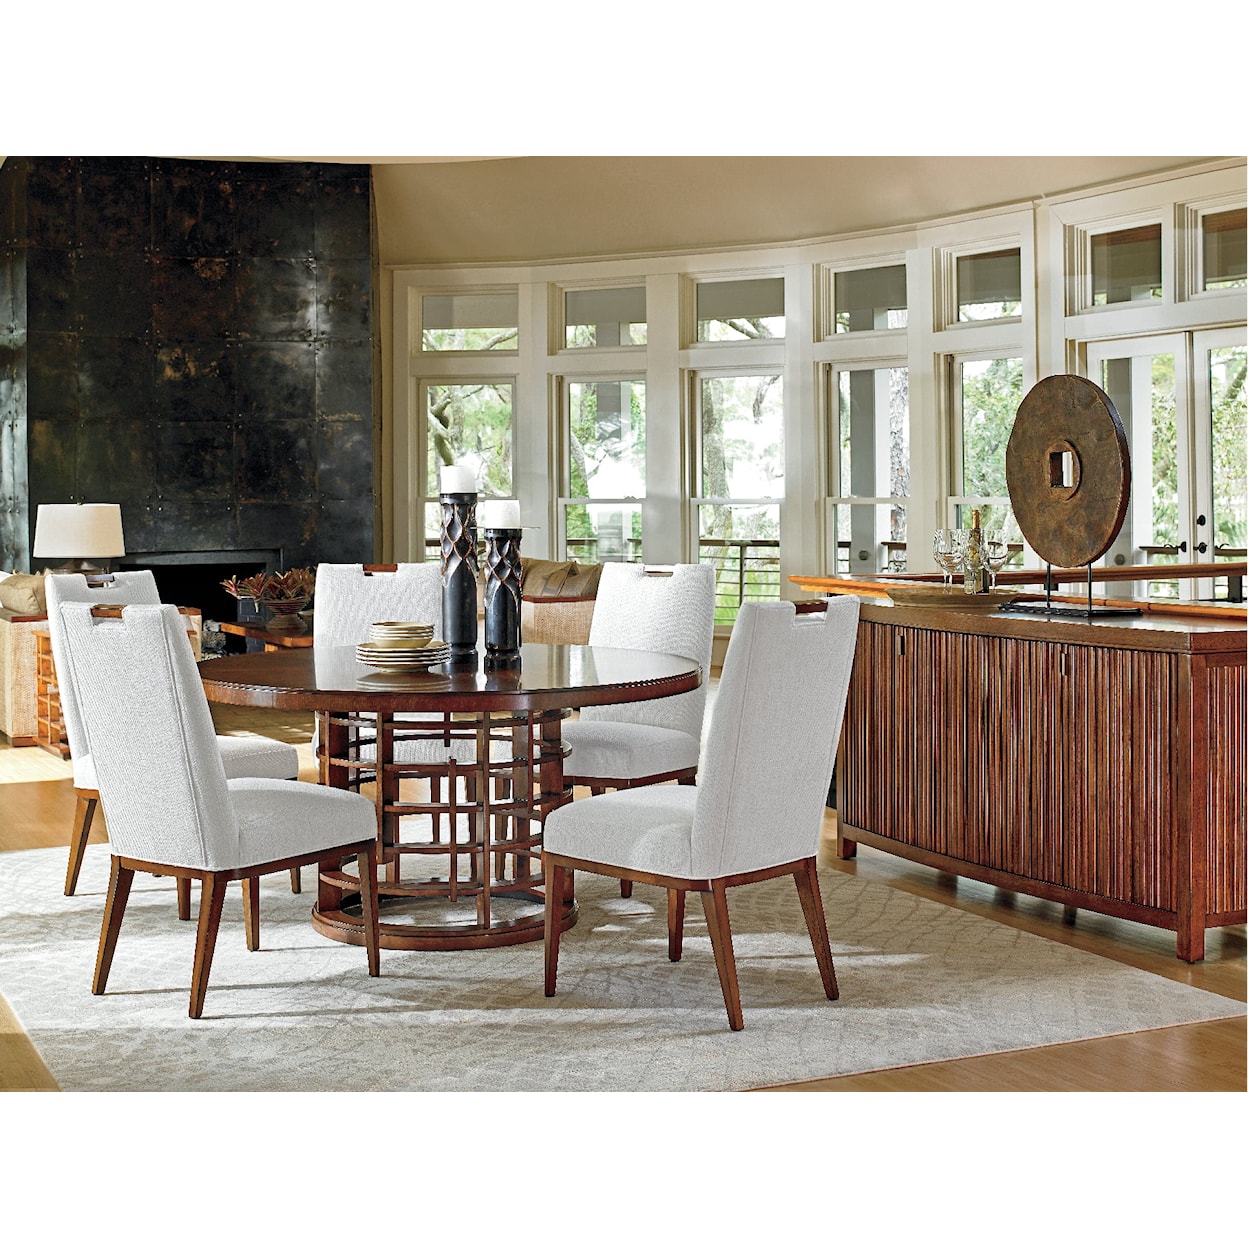 Tommy Bahama Home Island Fusion Dining Room Group